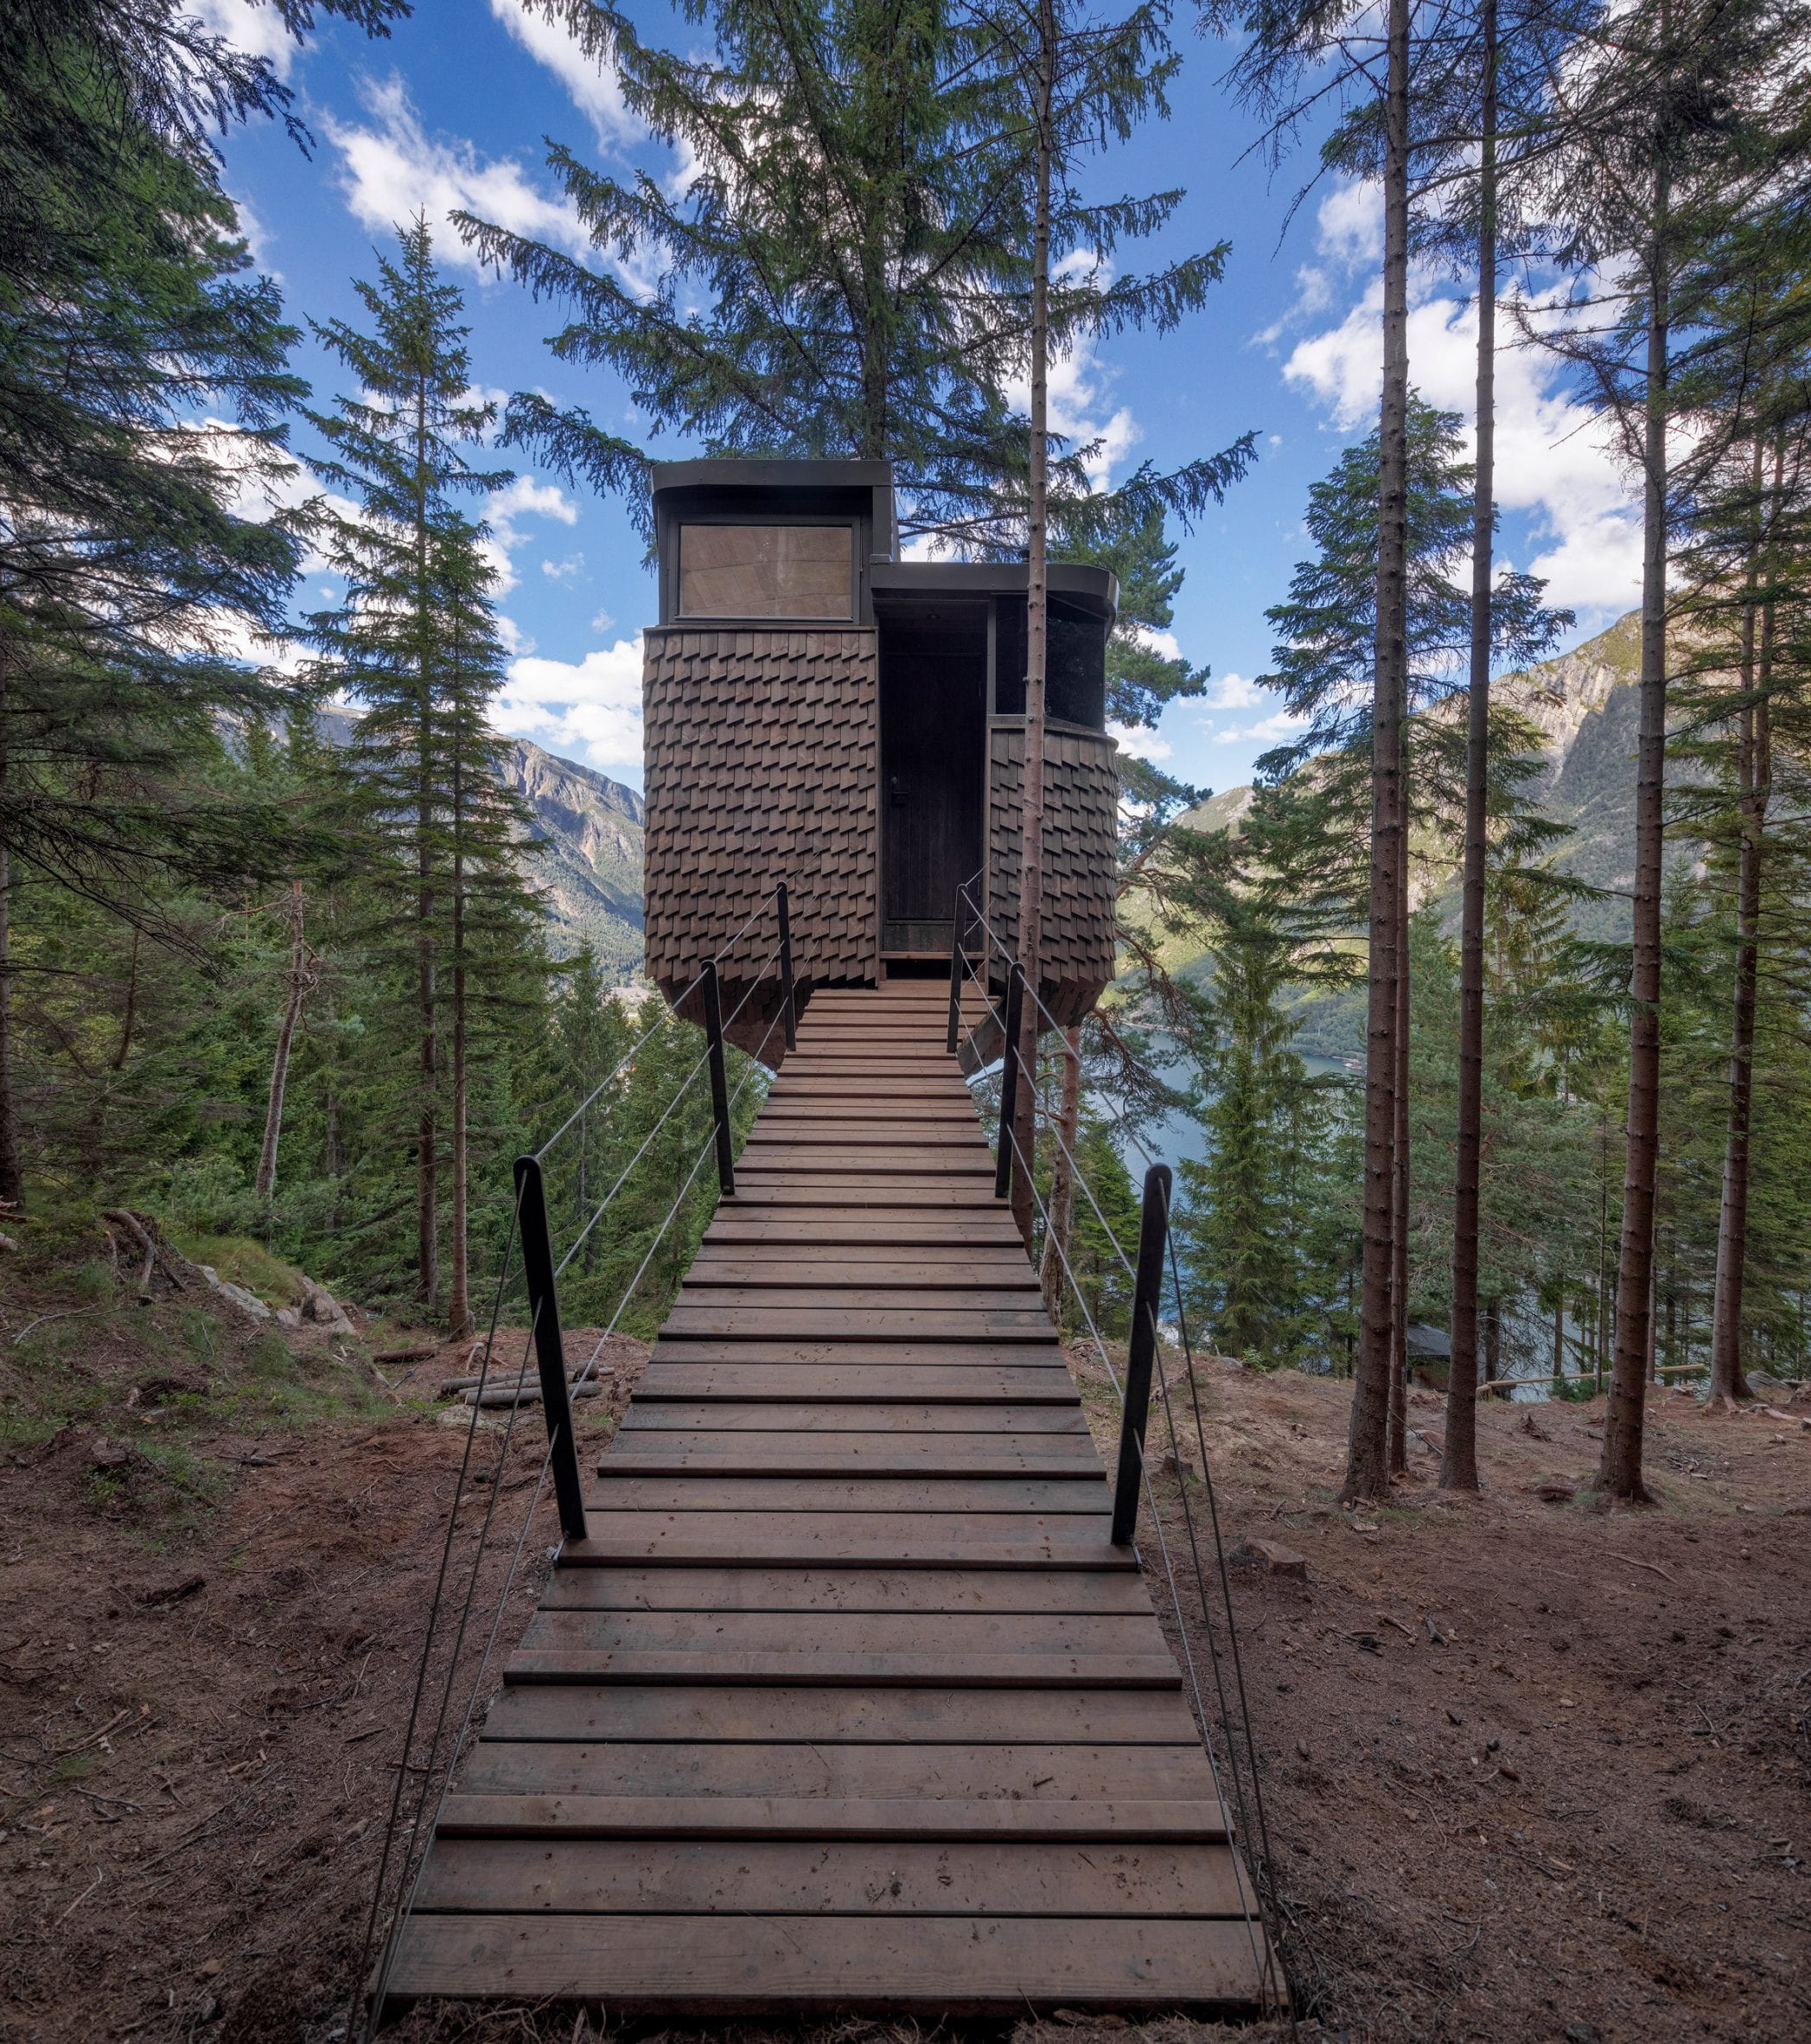 The woodnest treehouses are located in a pine forest